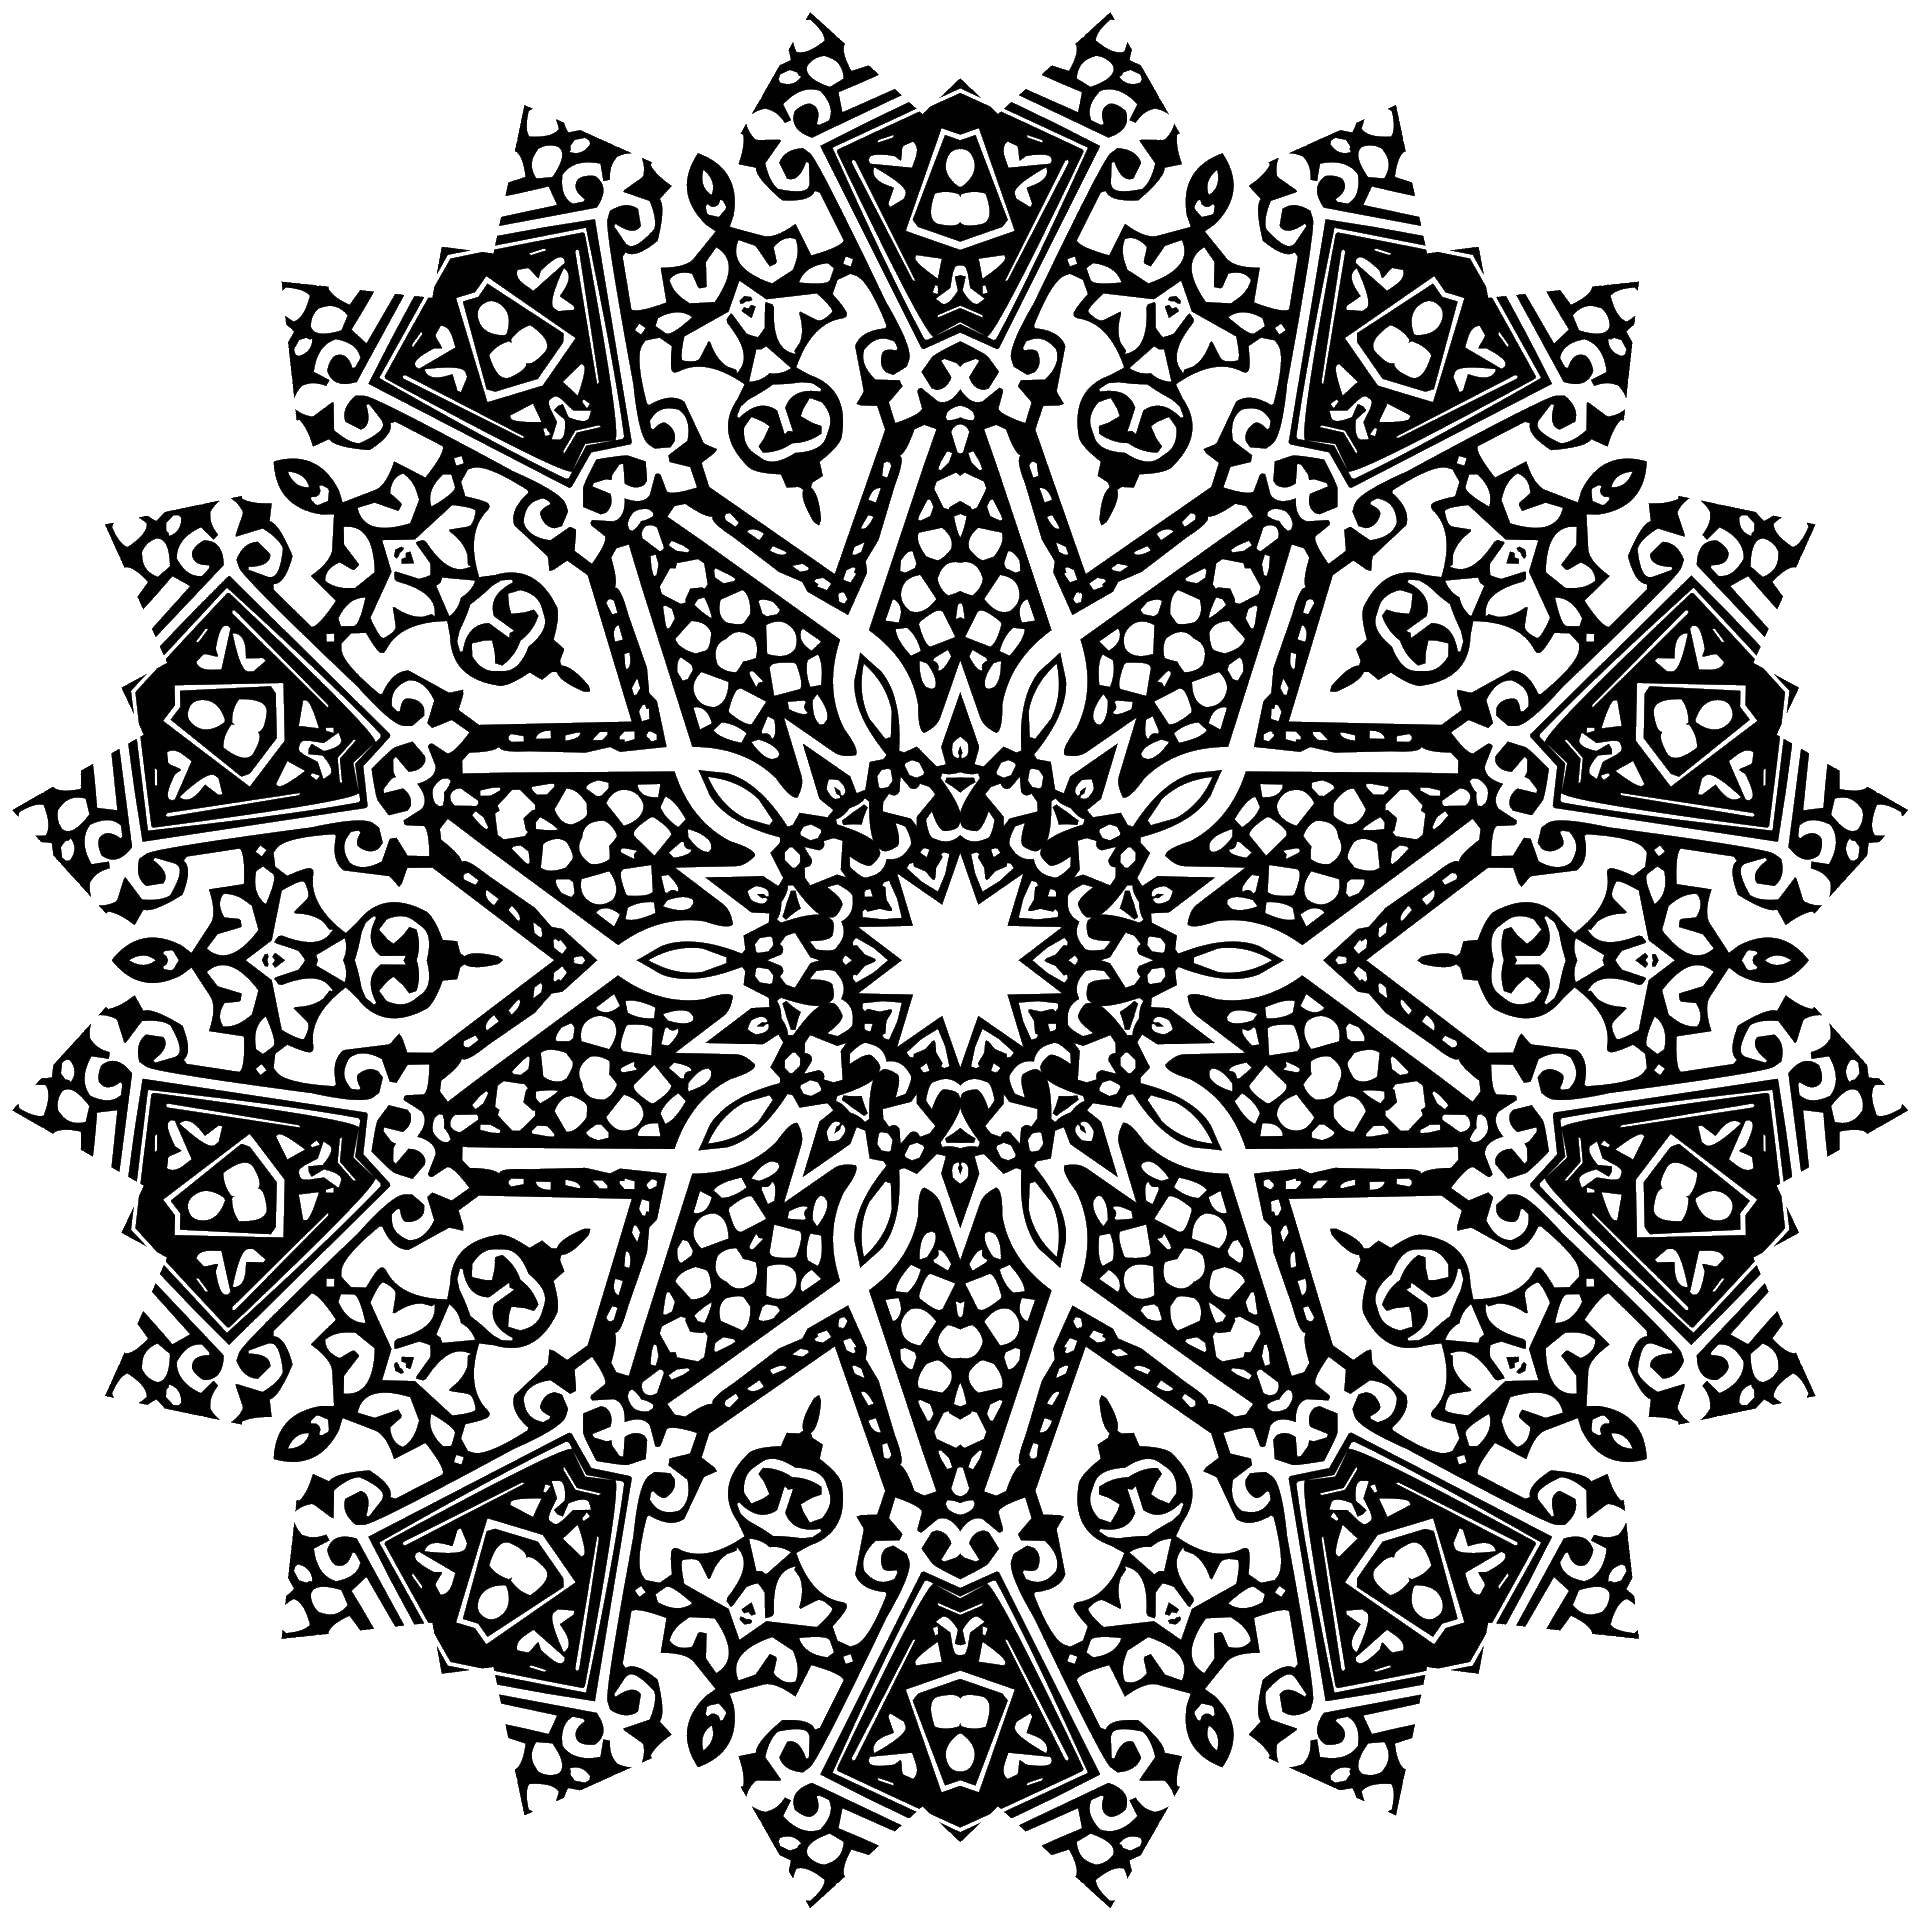 Coloring Patterns. Category coloring antistress. Tags:  patterns, shapes, stress relief.